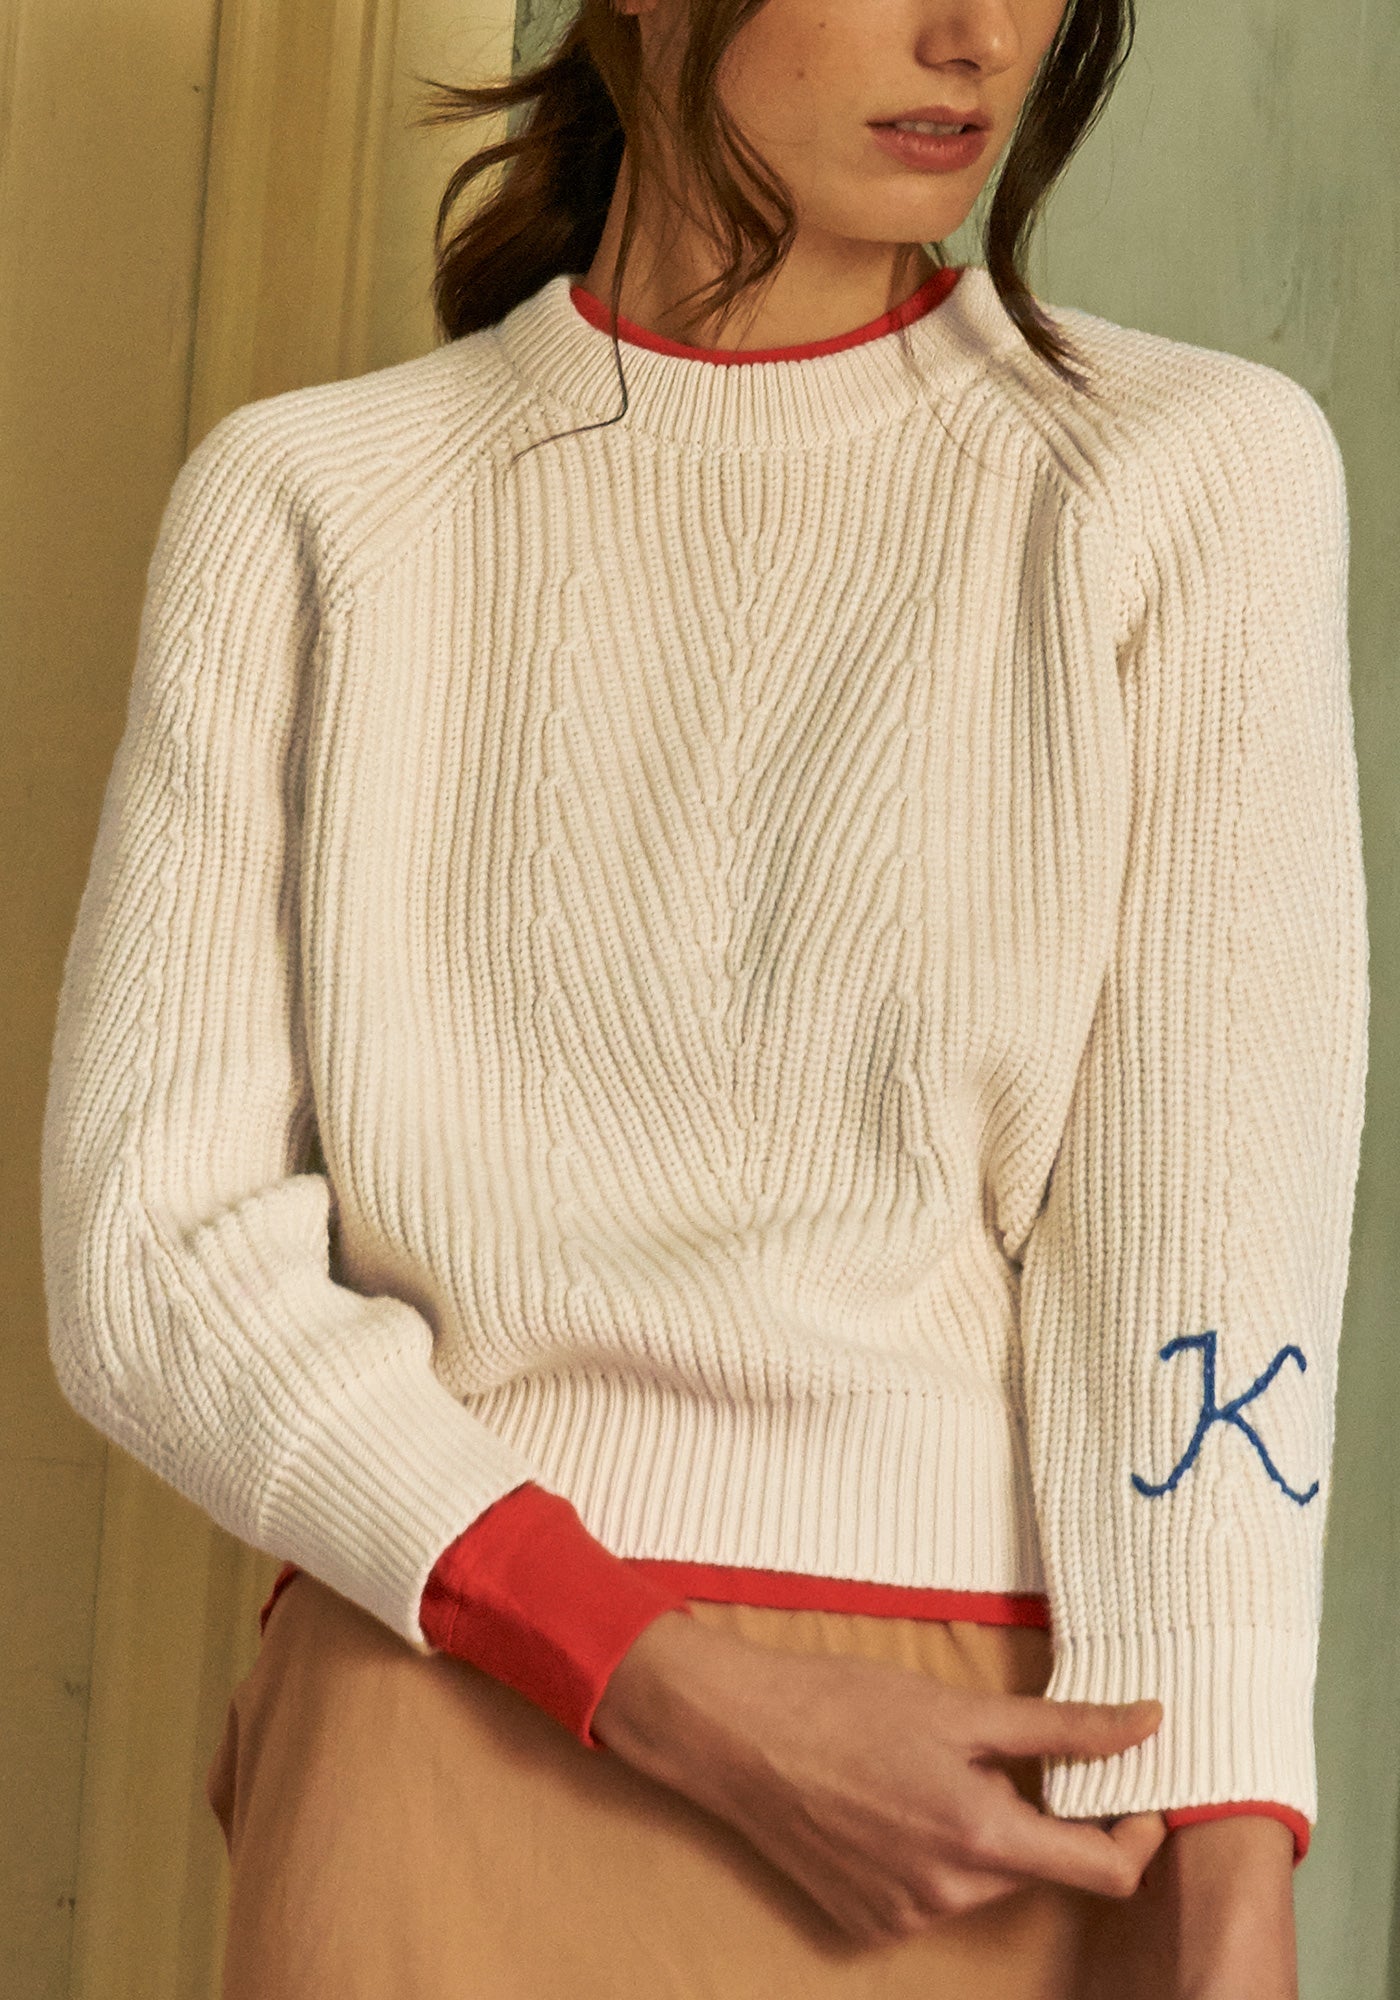 Embroidered Monogram Natural Chelsea Sweater - 1 Initial